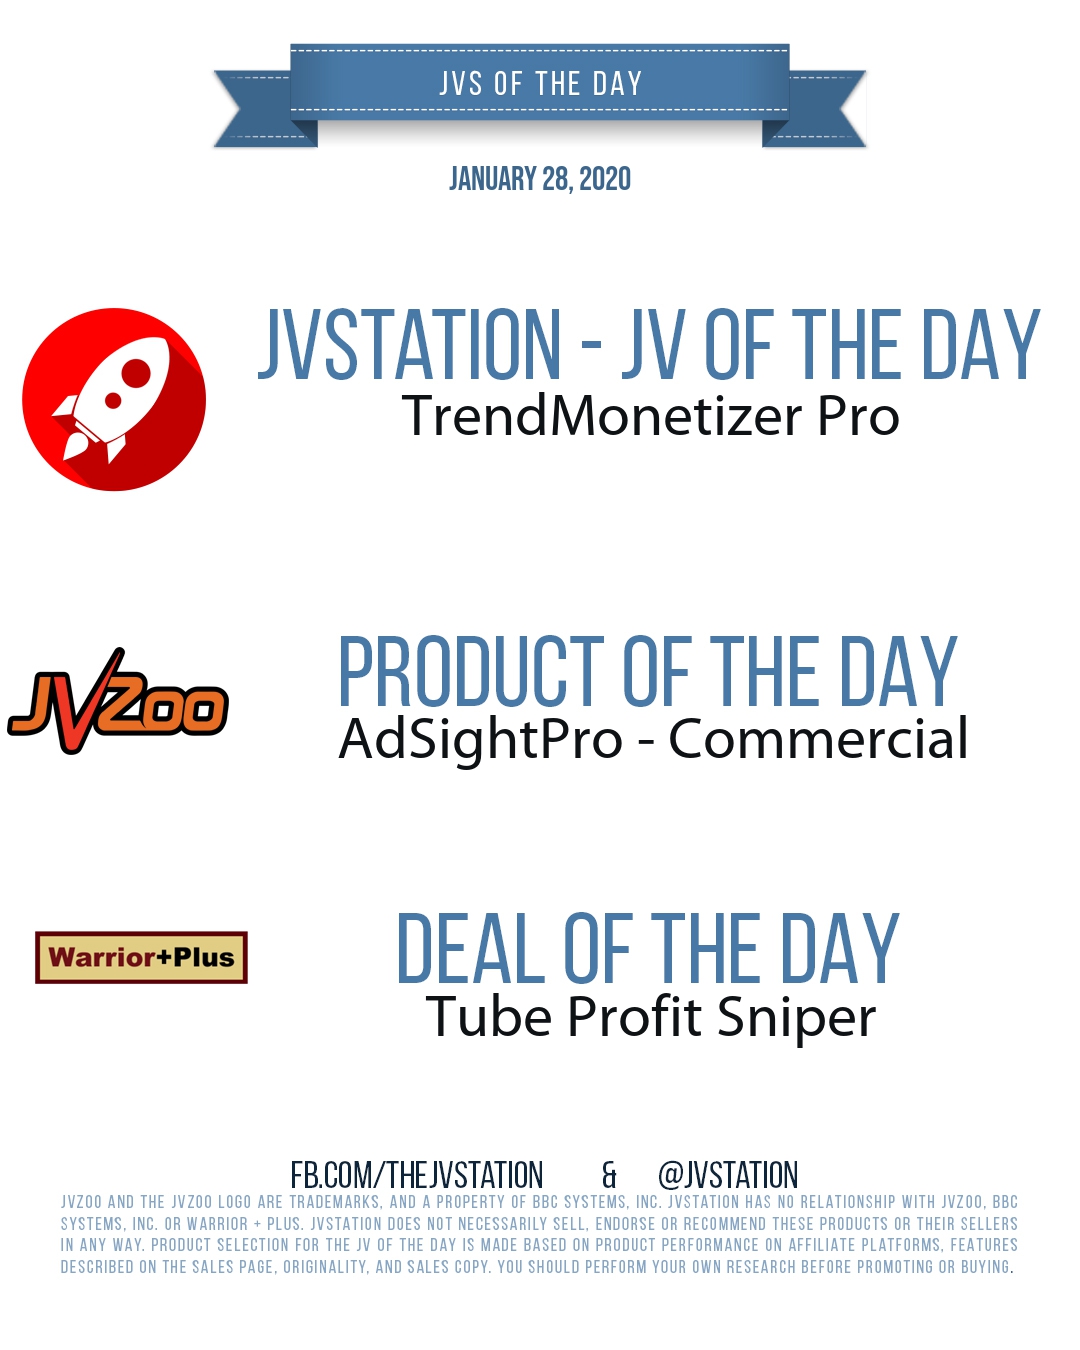 JVs of the day - January 28, 2020